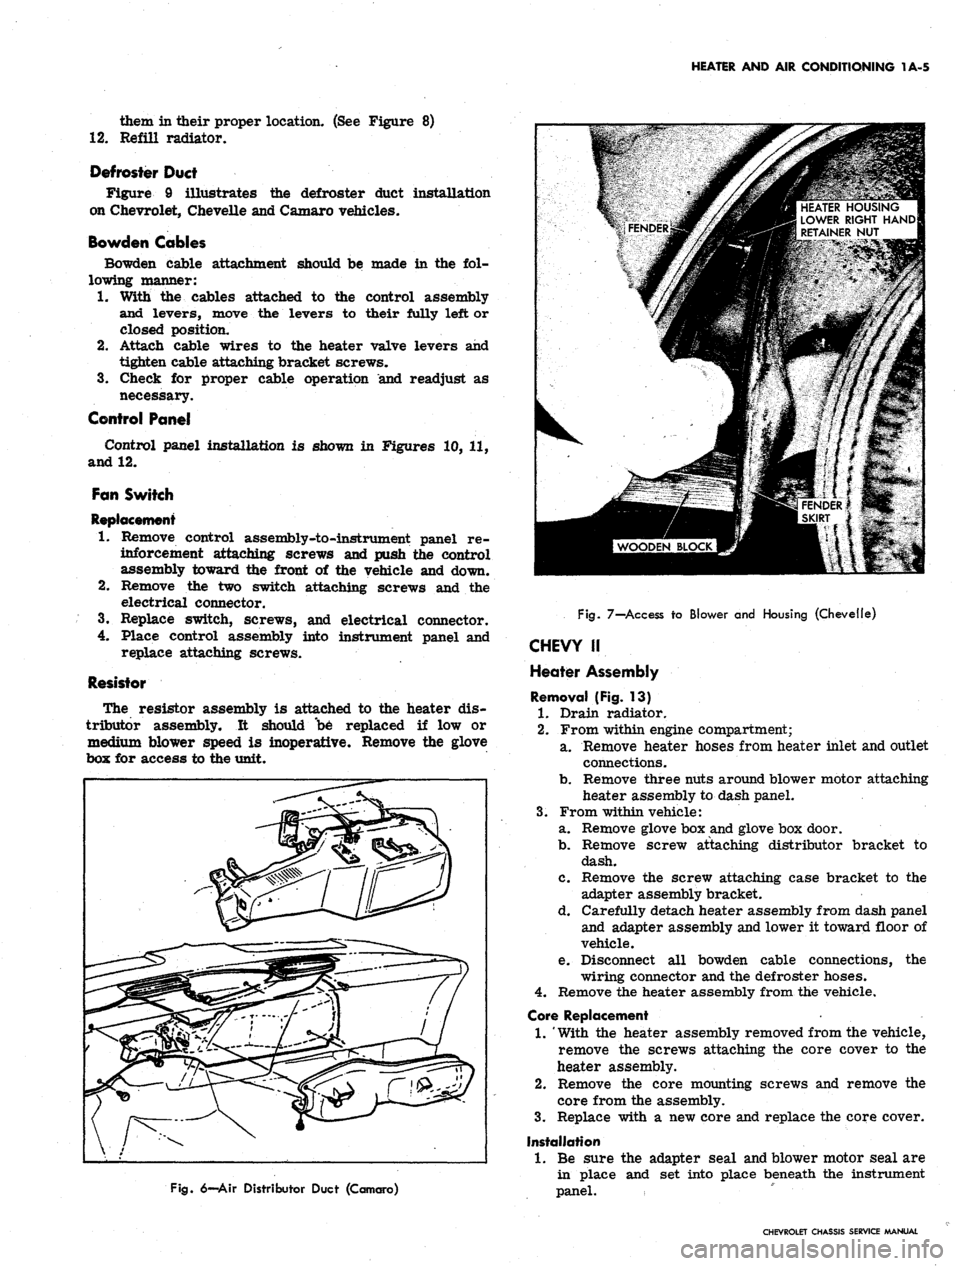 CHEVROLET CAMARO 1967 1.G Chassis Workshop Manual 
HEATER AND AIR CONDITIONING 1A-5

them in their proper location. (See Figure 8)

12.
 Refill radiator.

Defroster Duct

Figure 9 illustrates the defroster duct installation

on Chevrolet, Chevelle an